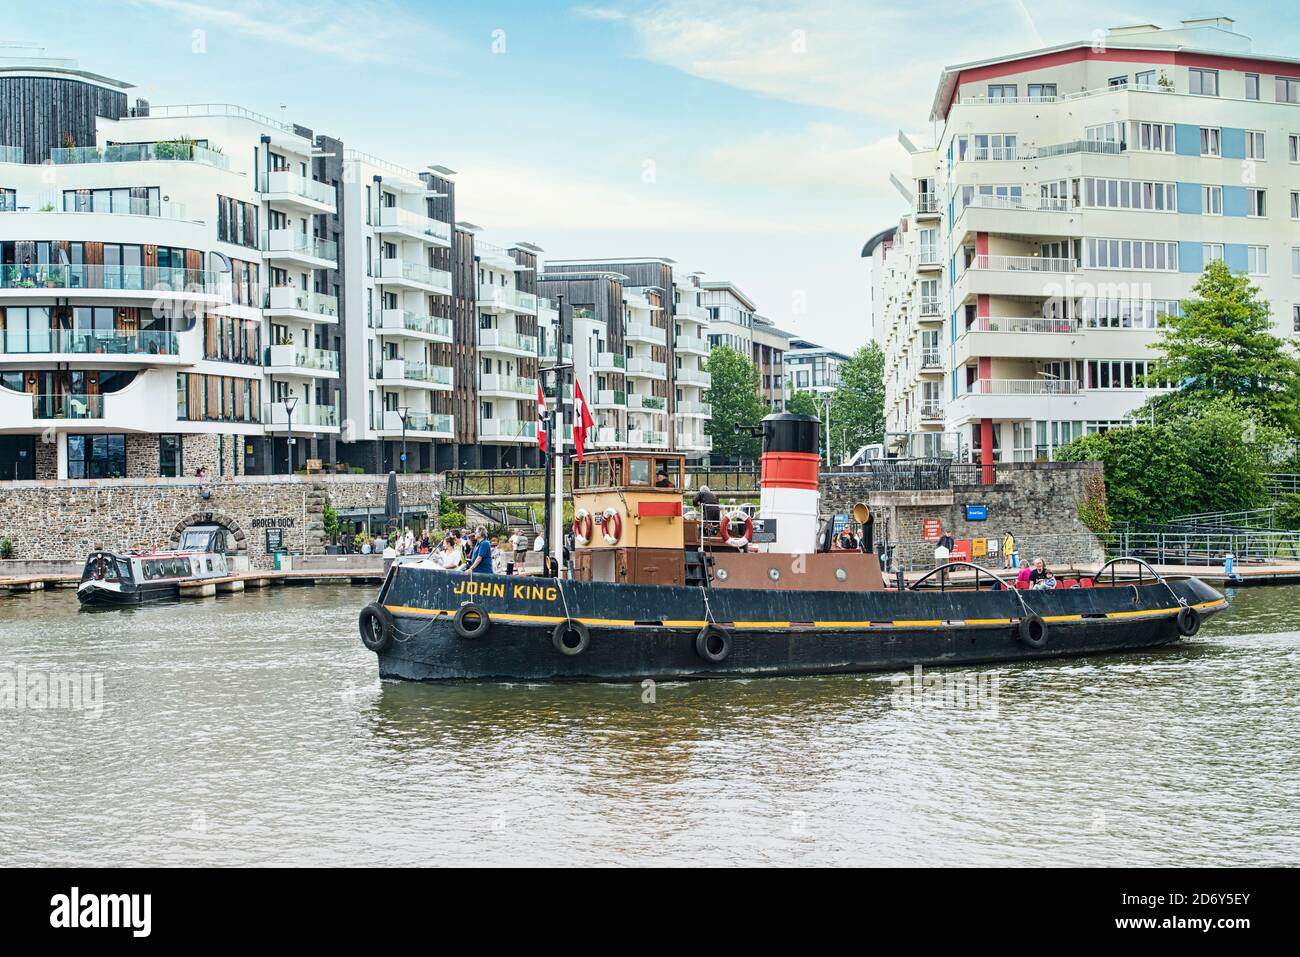 Historic John King tugboat, Bristol, UK. Owned by Bristol Museums. Fully restored. Diesel tug. Tugged SS Great Britain to dry dock. Working exhibit. Stock Photo